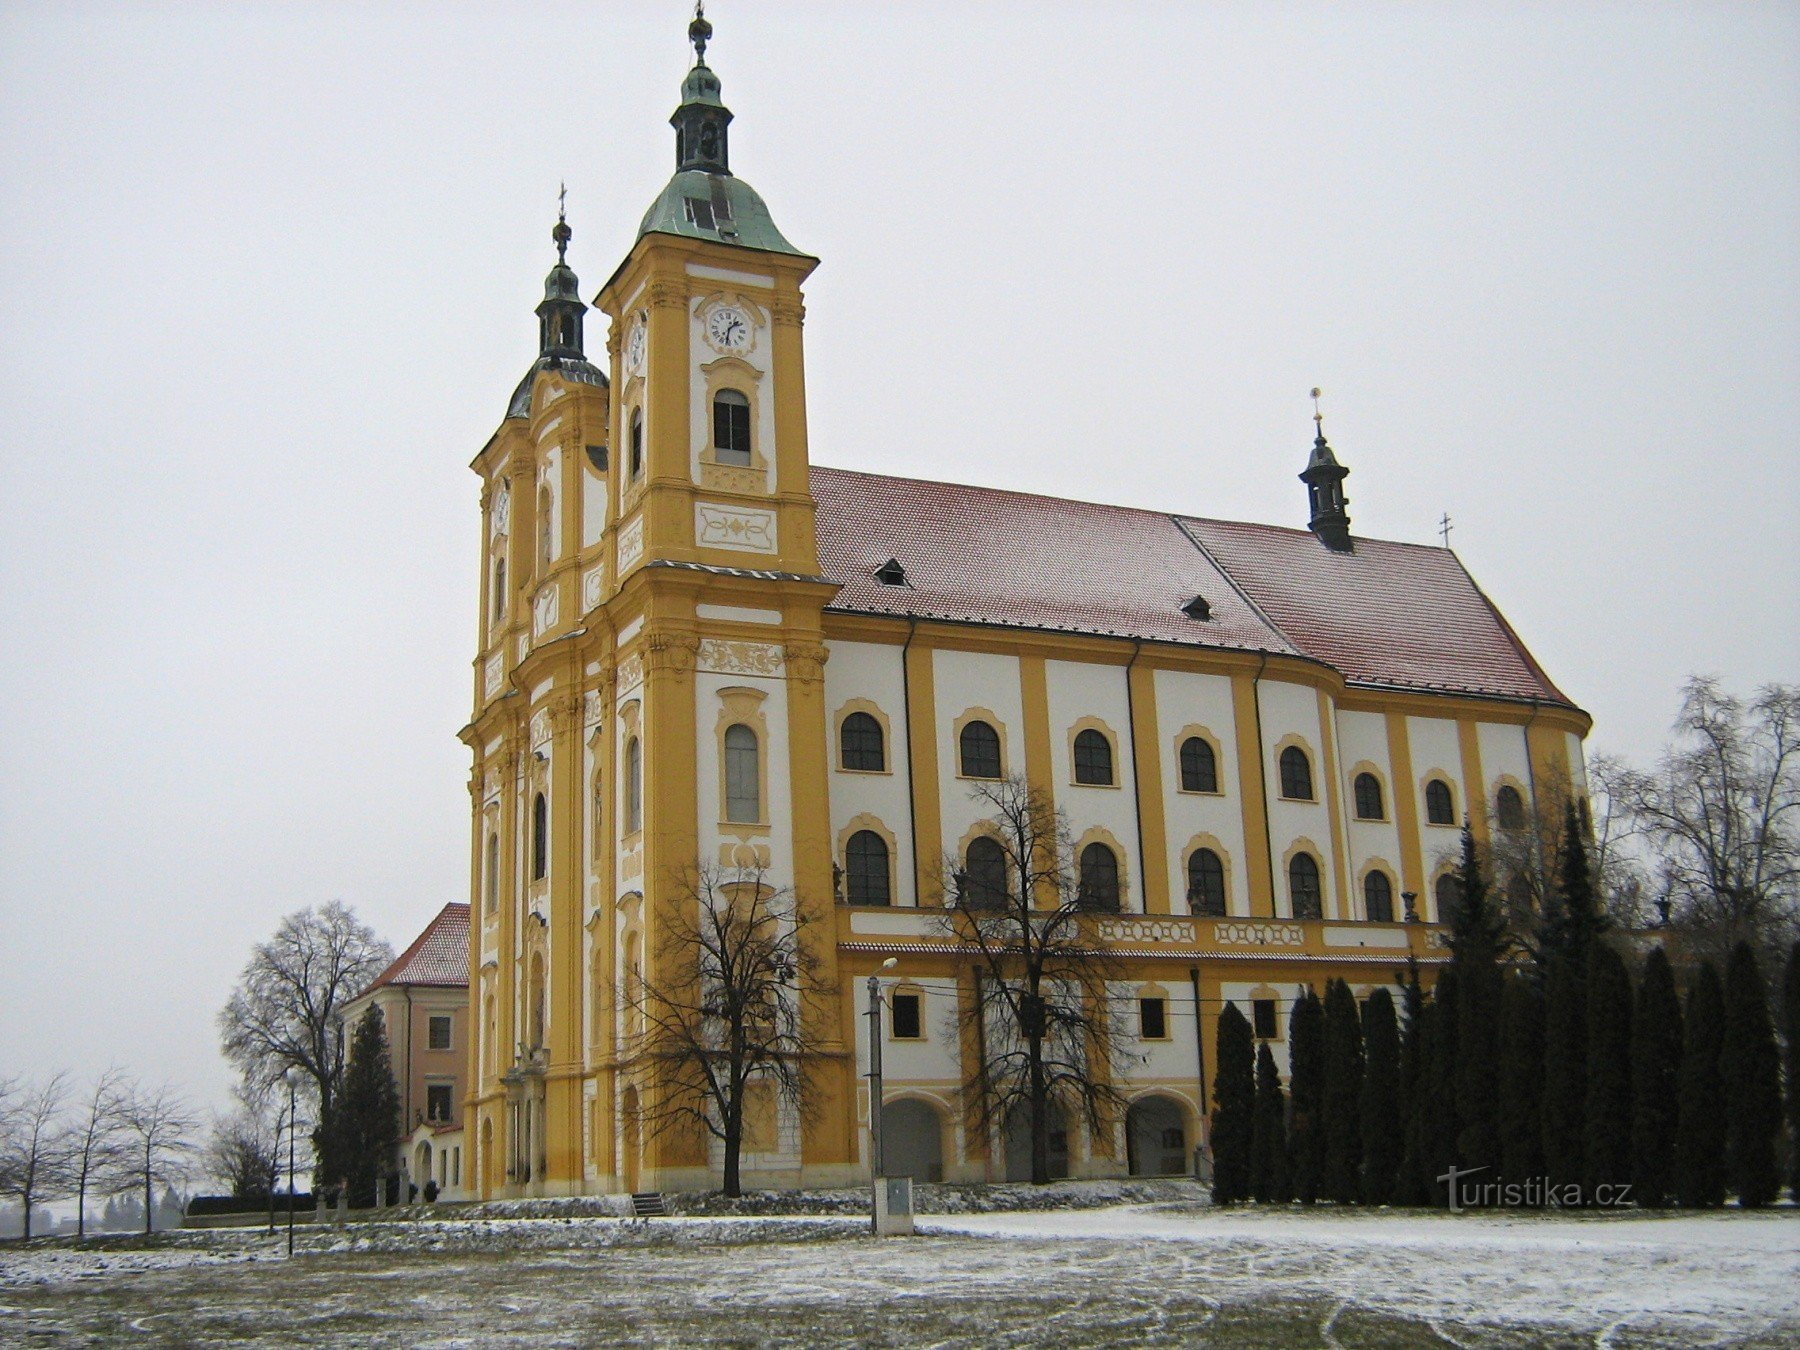 Dub nad Moravou - pilgrimage church of the Purification of the Virgin Mary